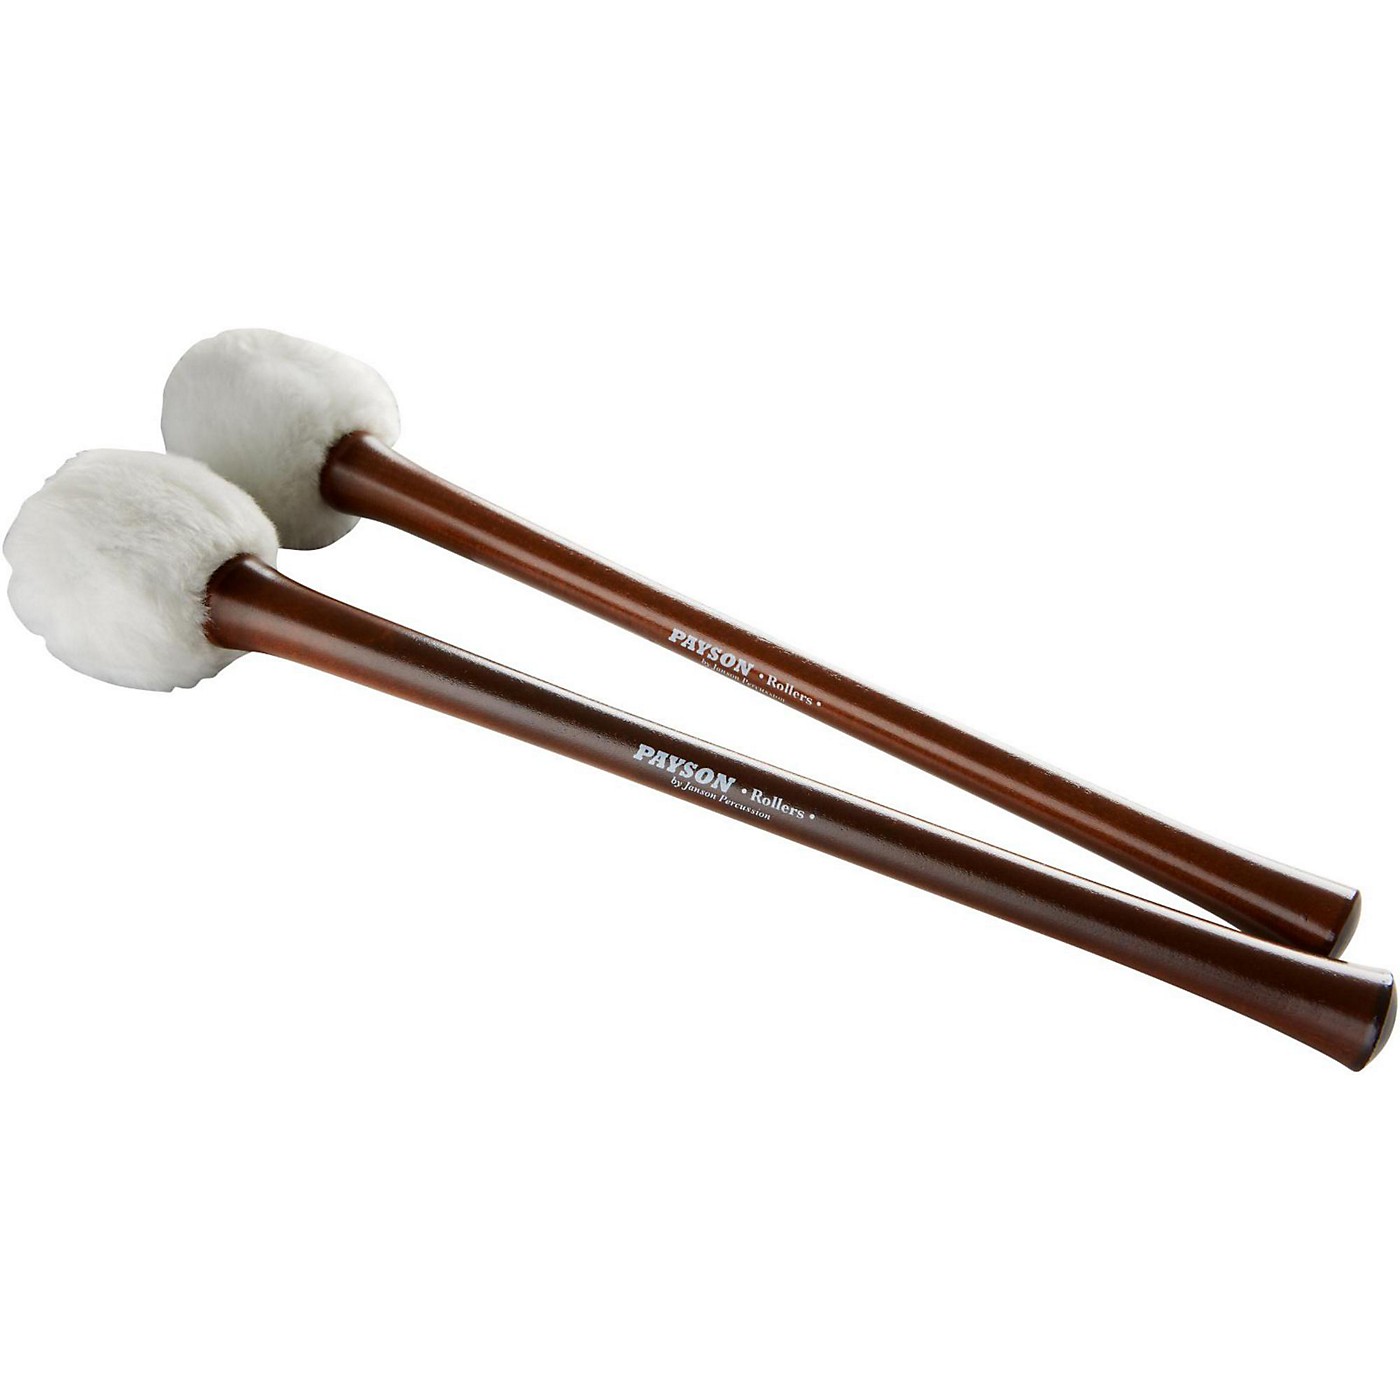 Ludwig Payson Concert Bass Drum Mallet thumbnail